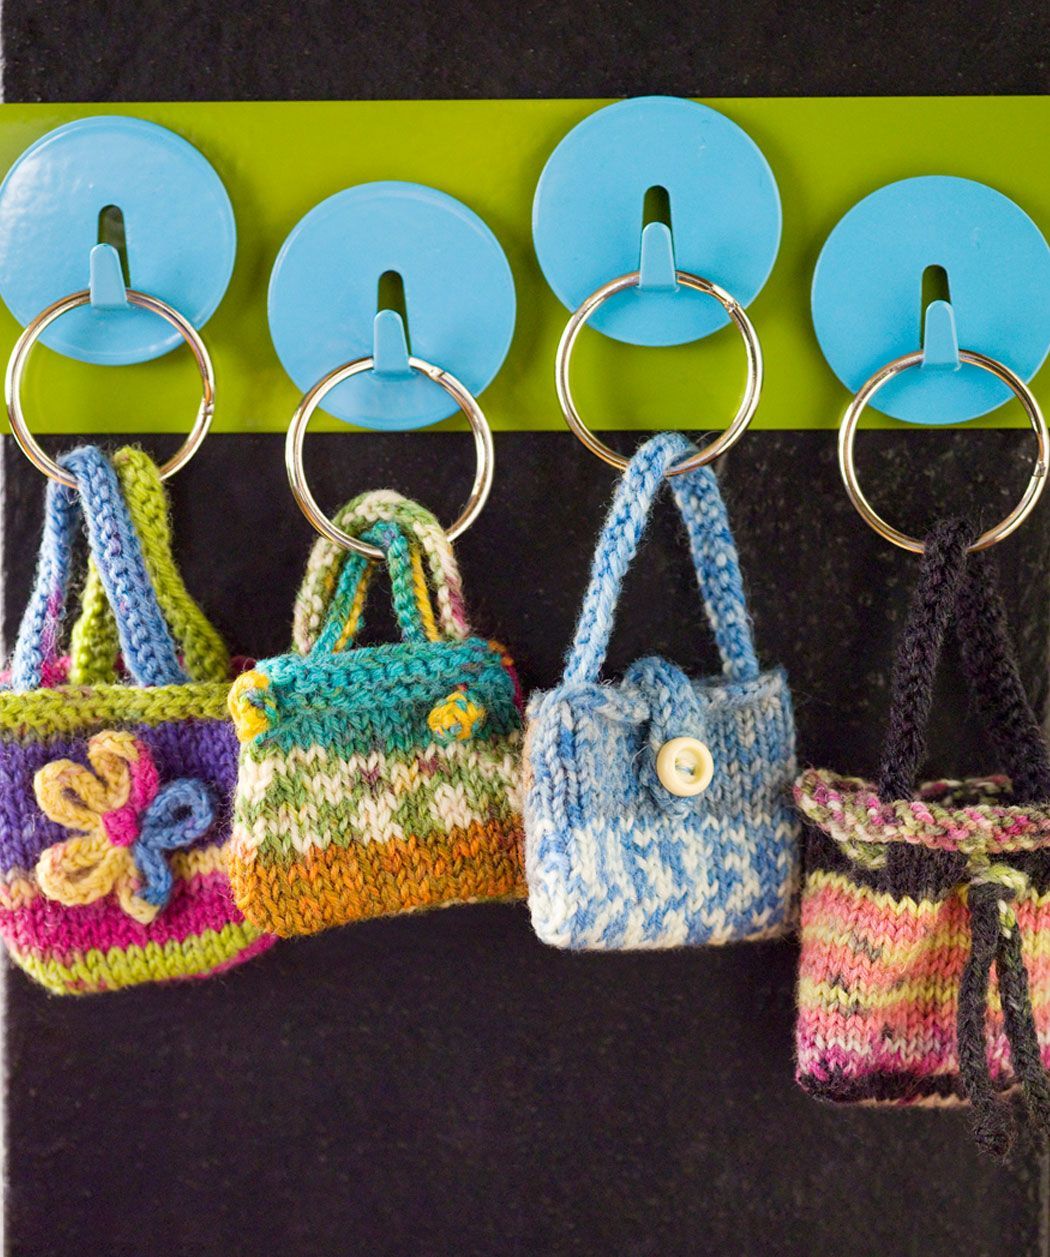 These mini knit keyring purses are awfully cute. Just make sure to knit them in